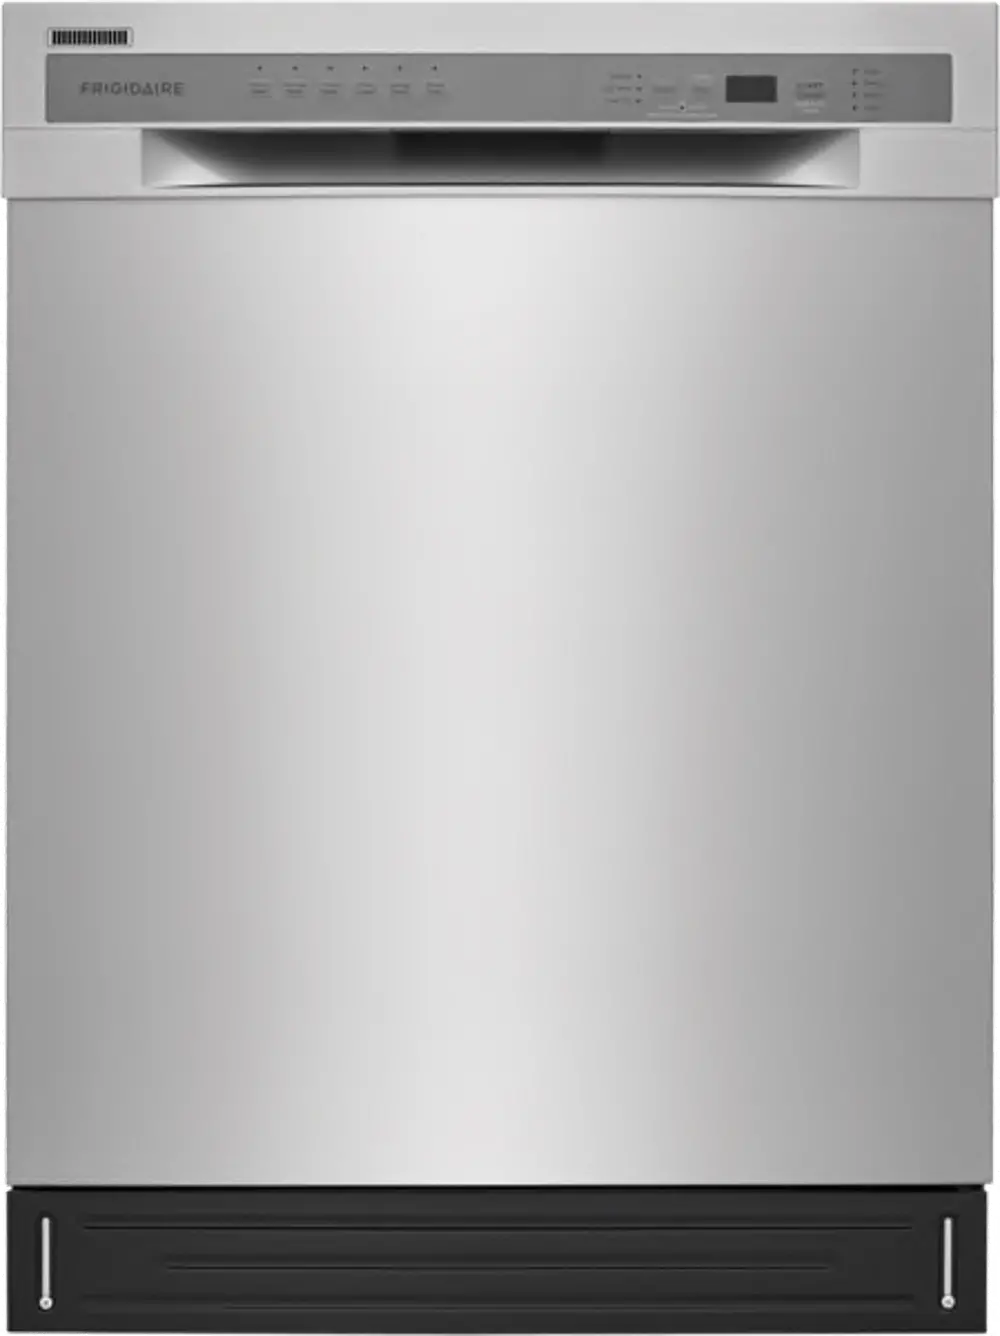 FFBD2420US Frigidaire Front Control Dishwasher - Stainless Steel-1